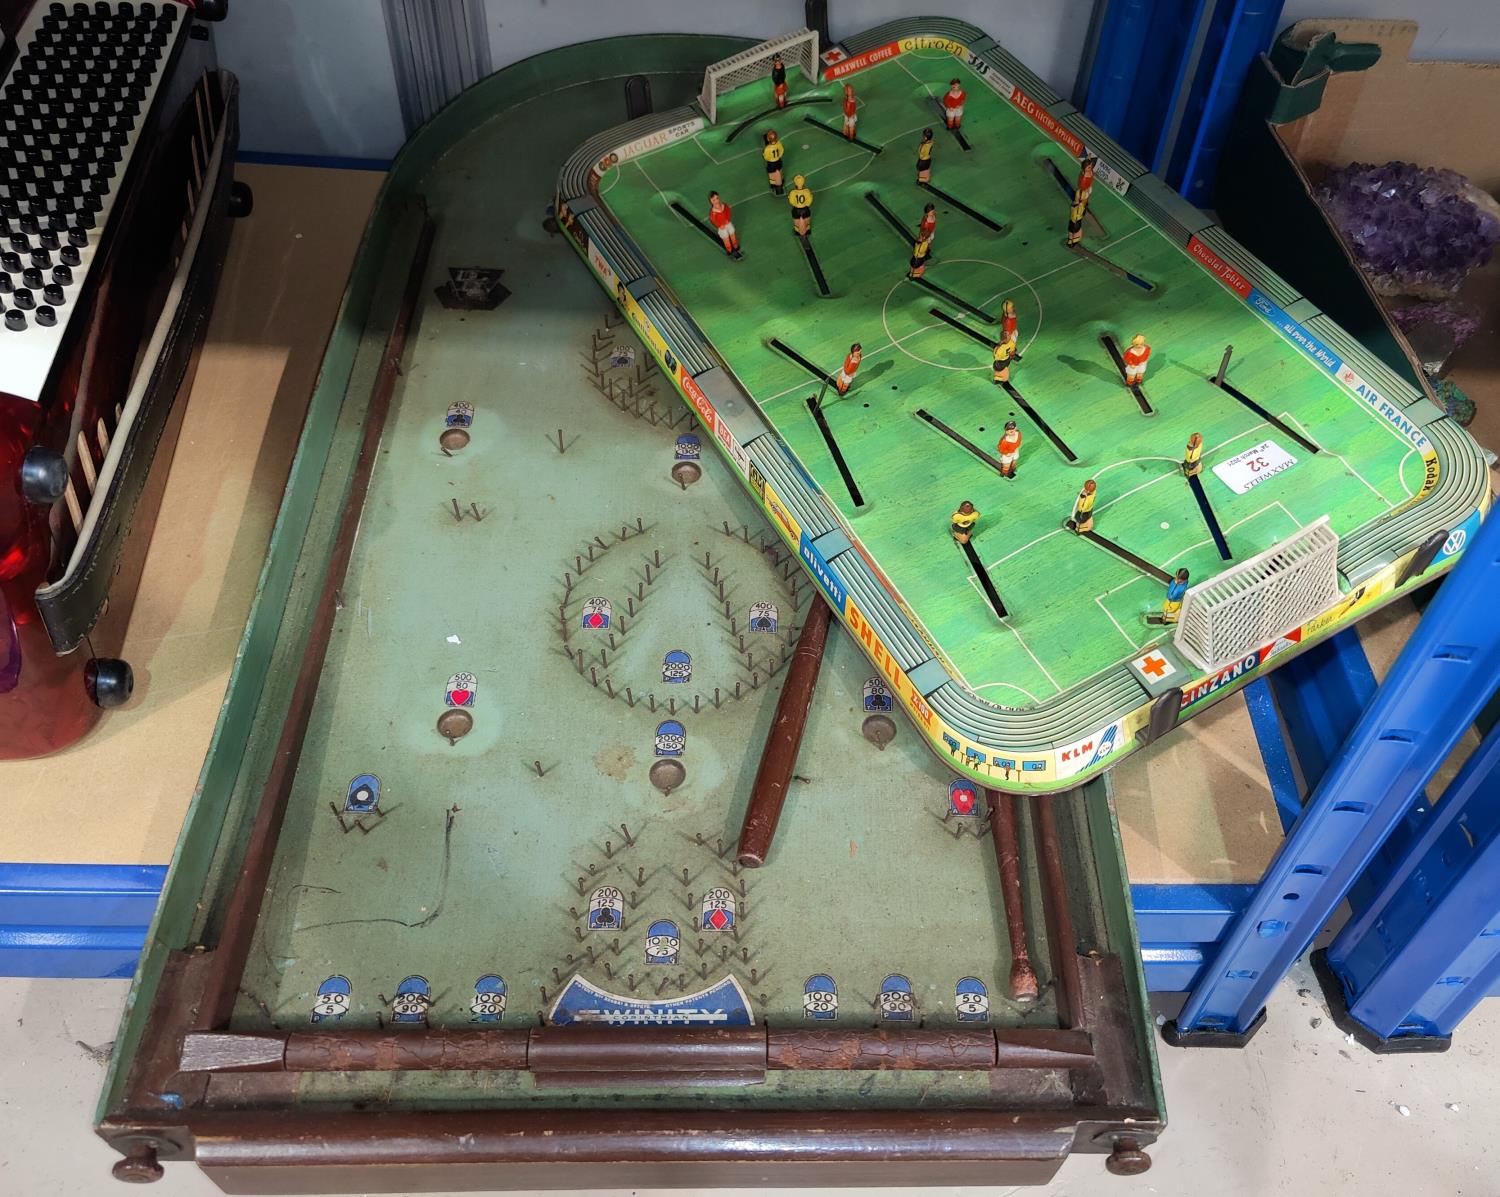 A 1960's tinplate table football game; a bagatelle board